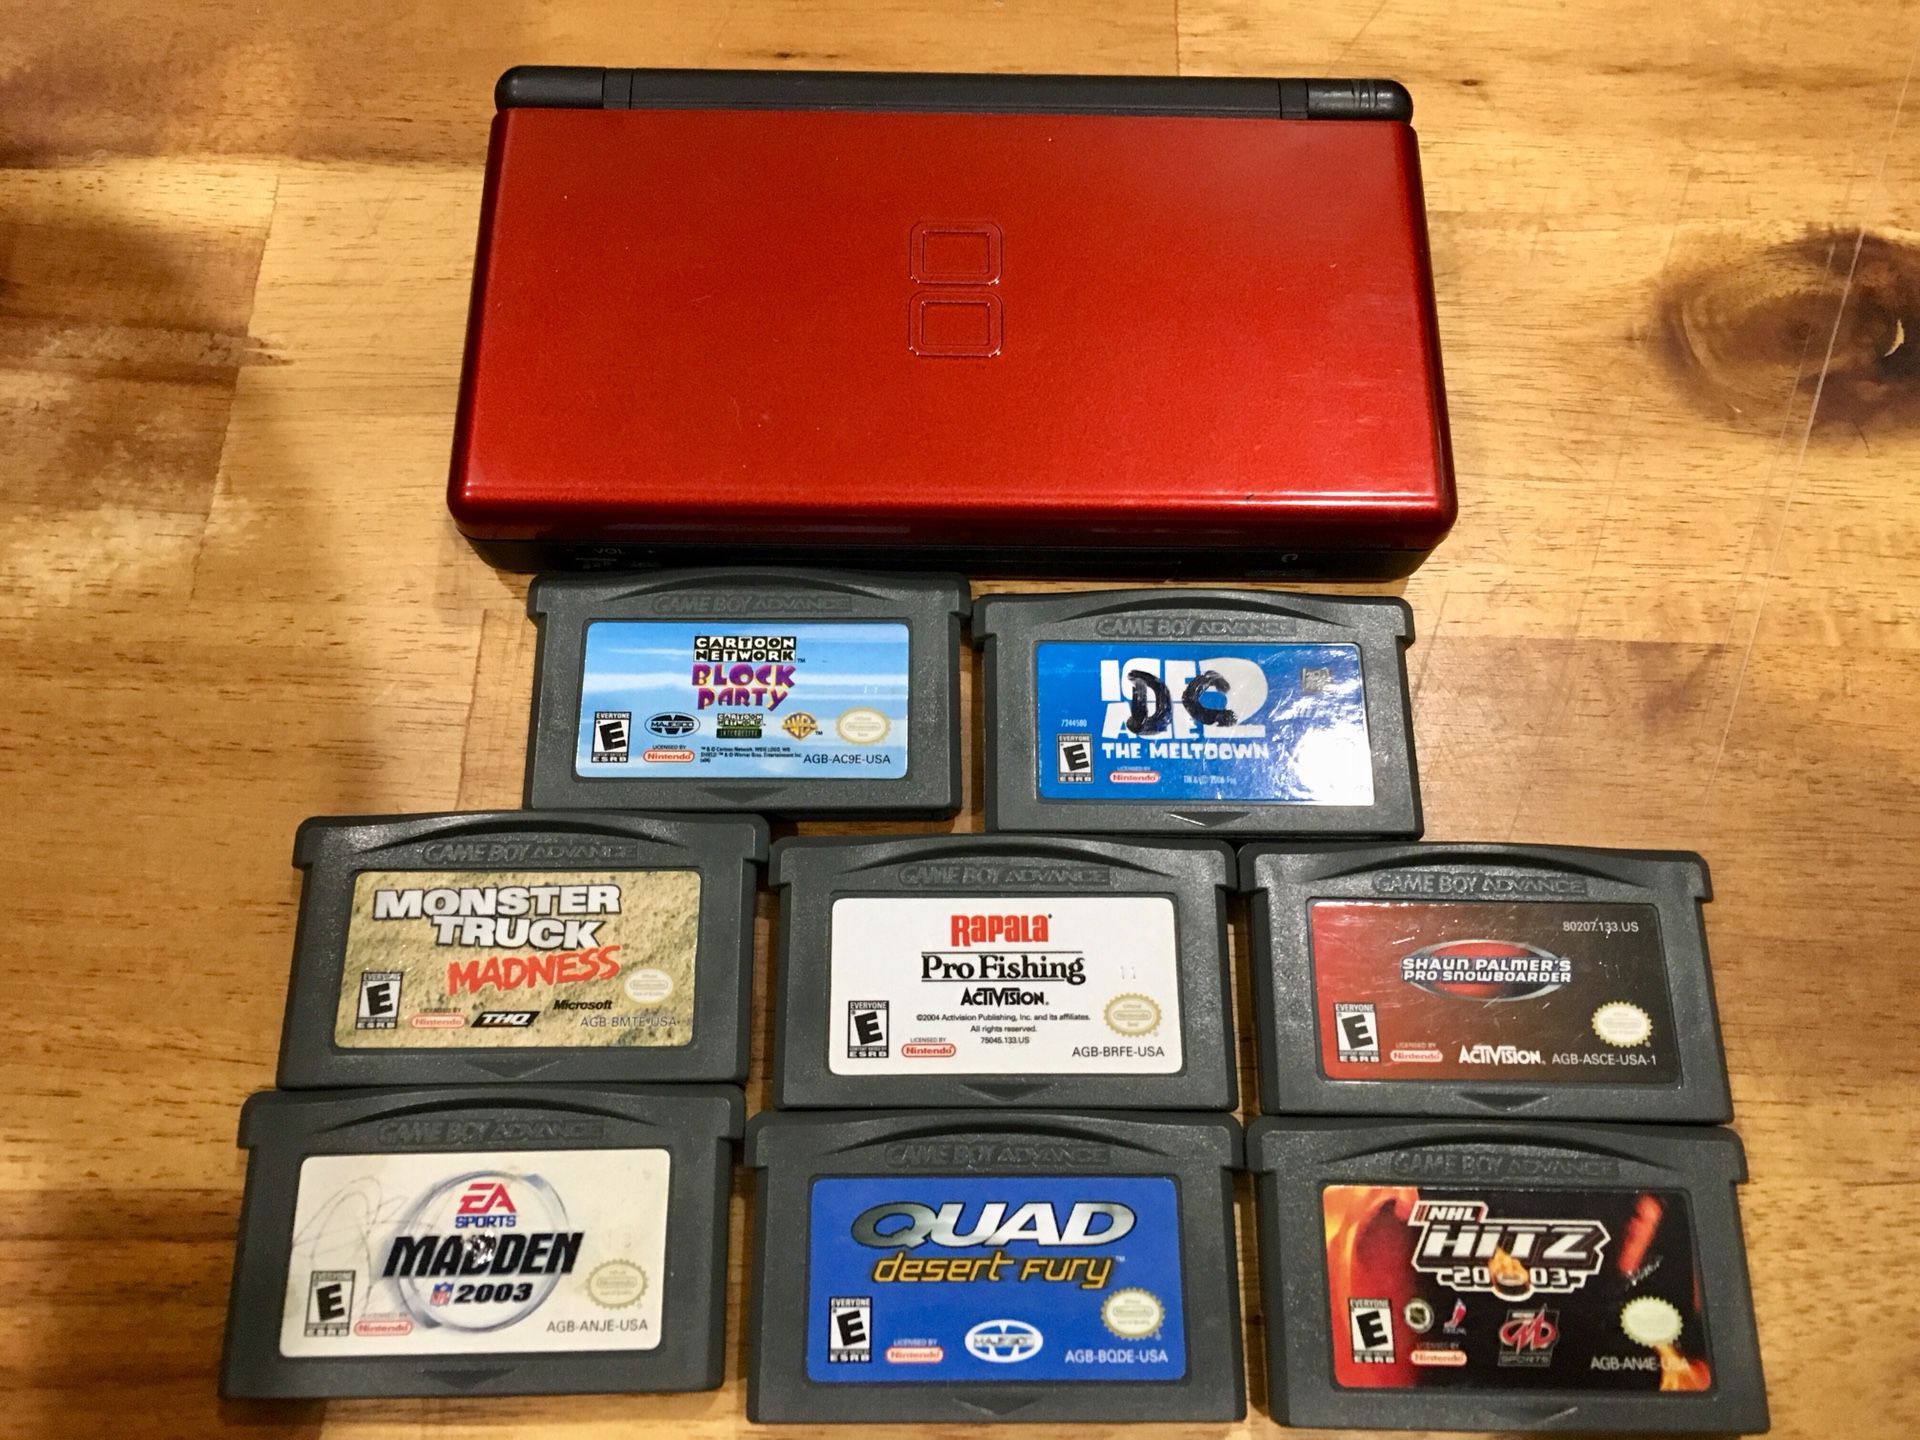 Nintendo Ds Lite With 8 Gameboy Advance Games For Sale In Mesa Az Offerup